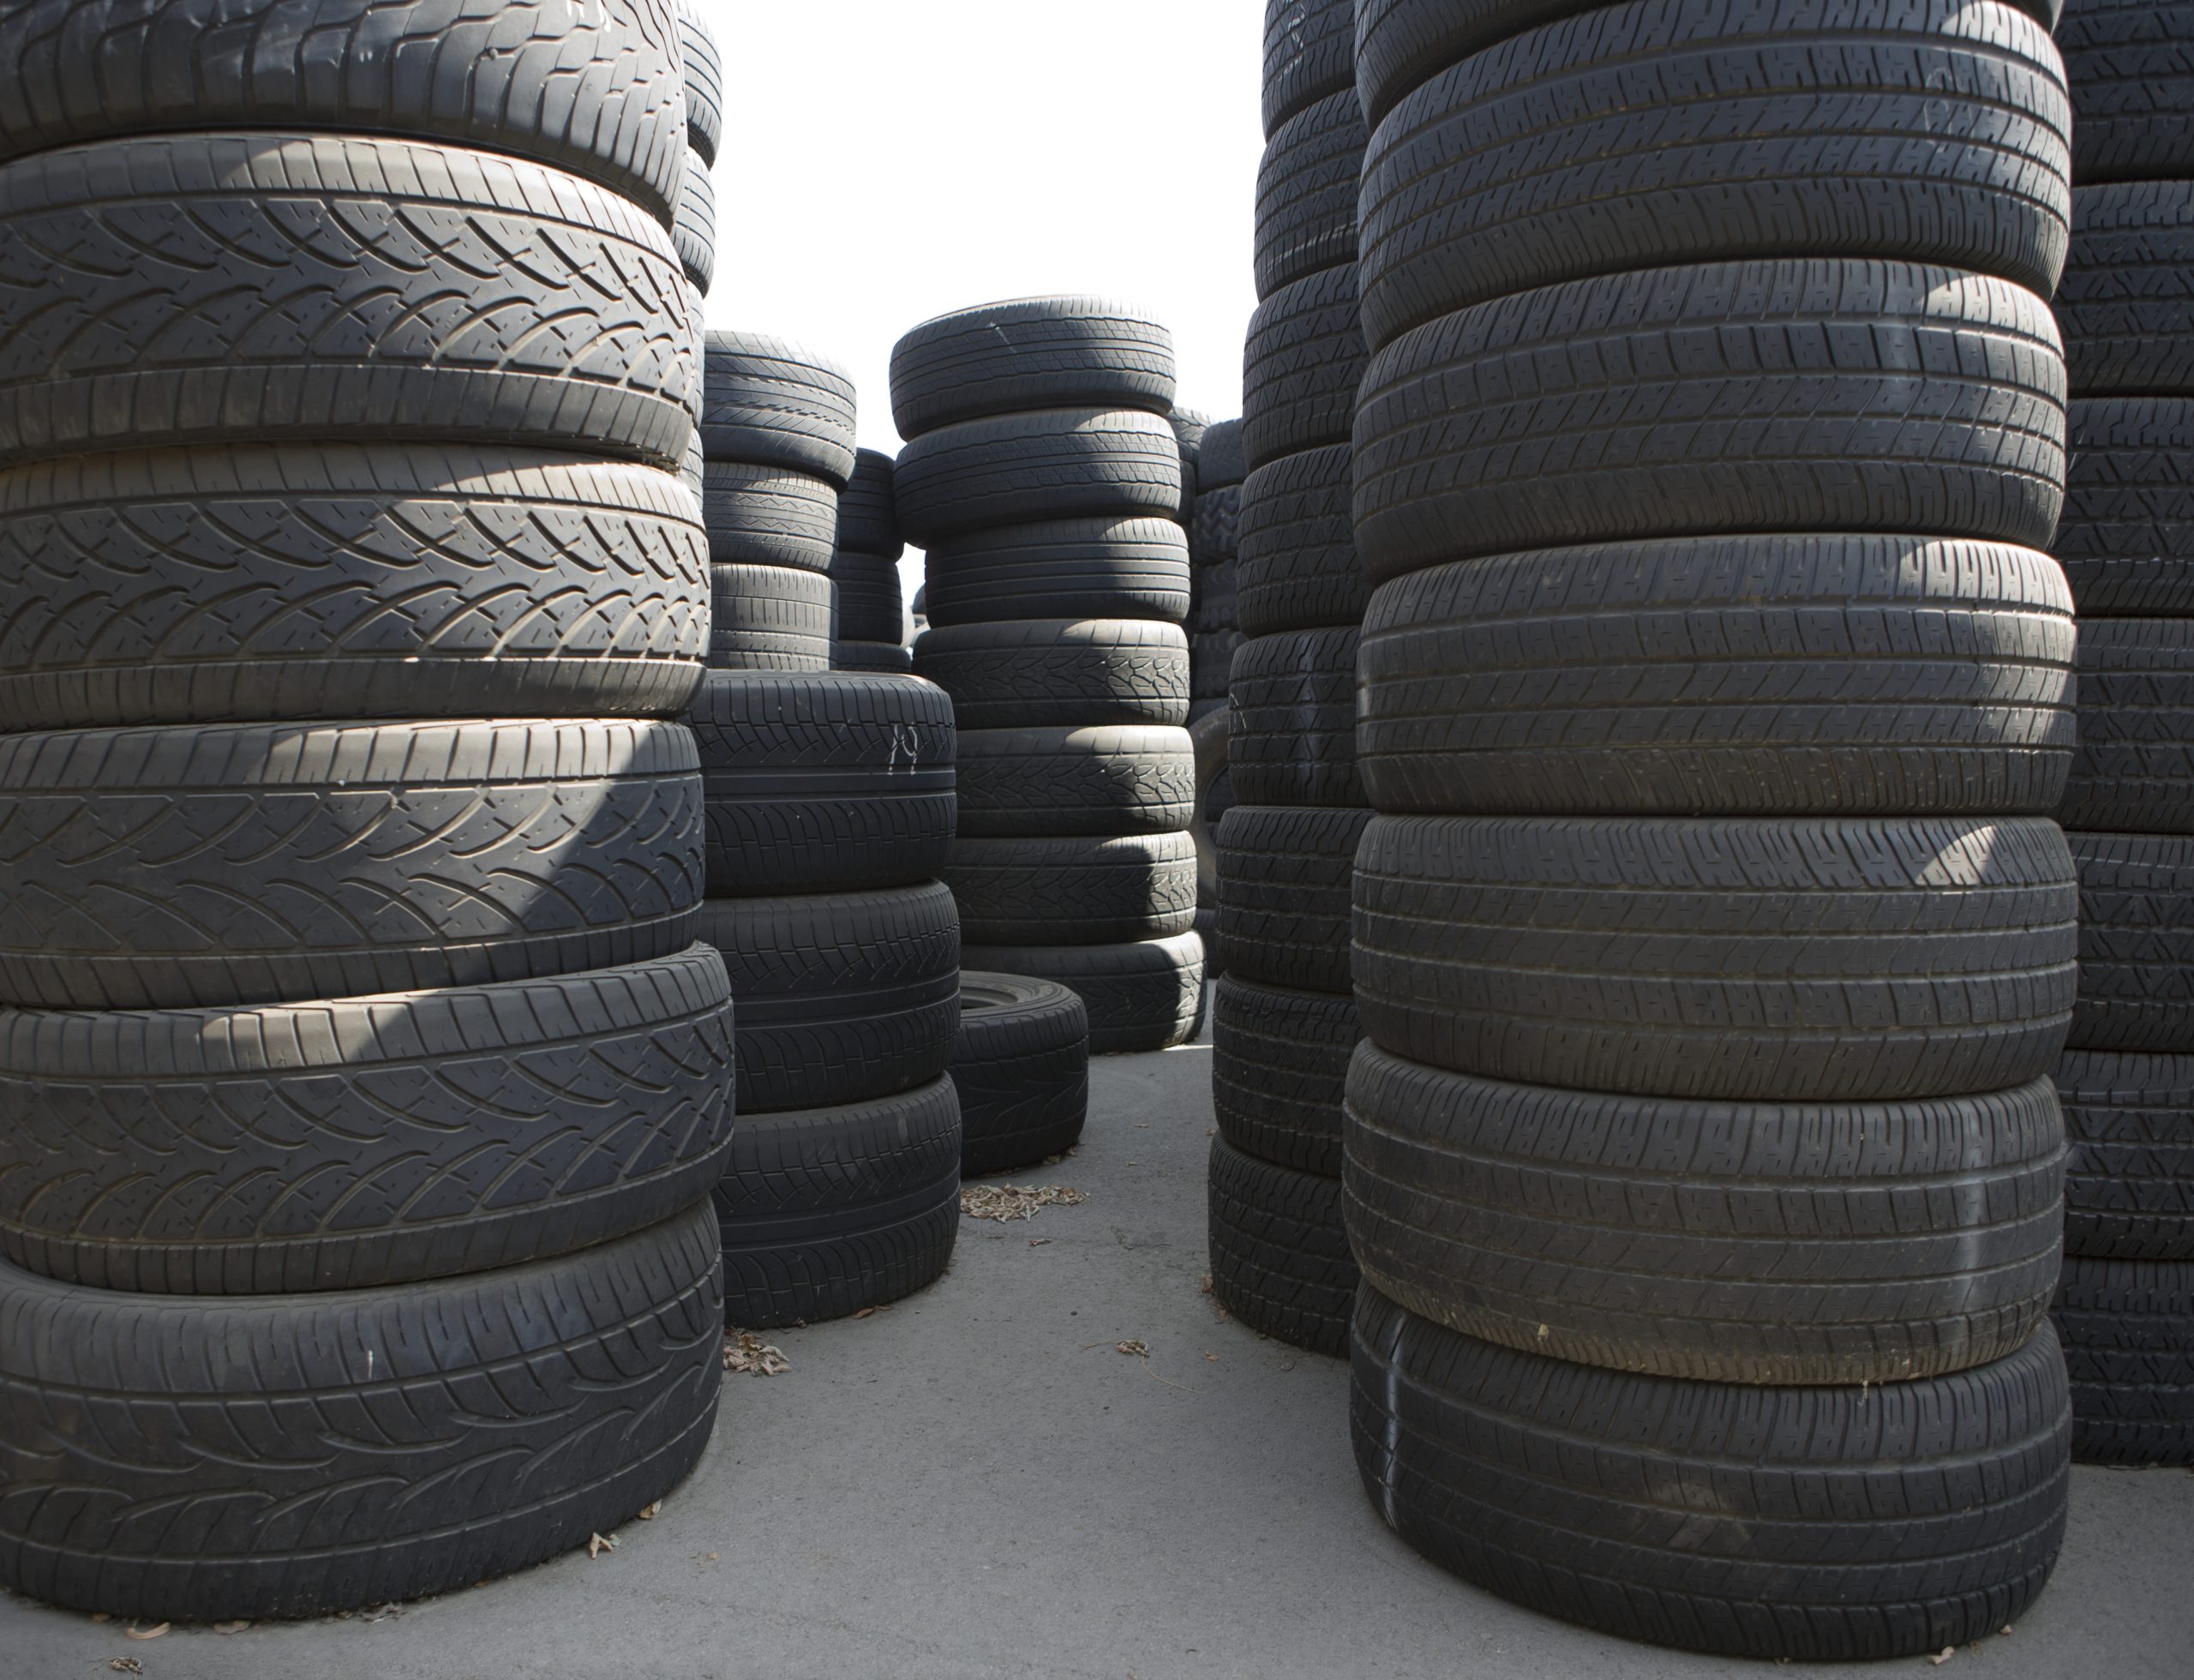 Deadly danger .. Used tires trade is booming